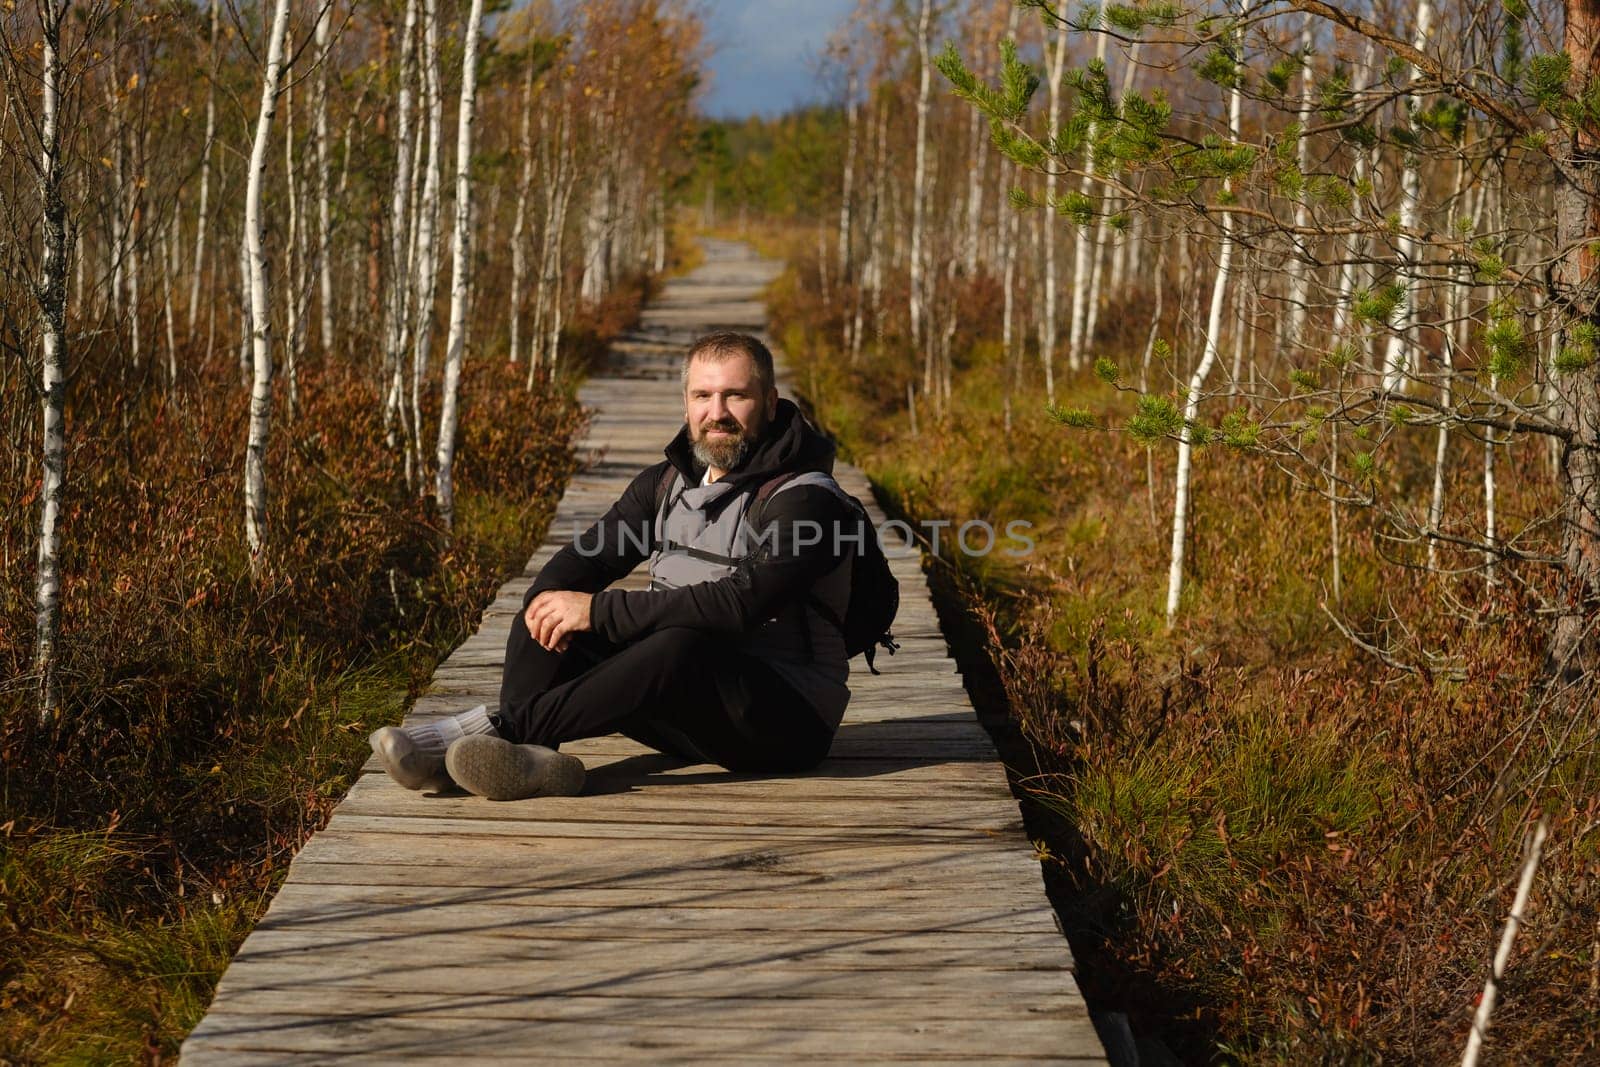 A man sits on a wooden path in a swamp in Yelnya, Belarus.